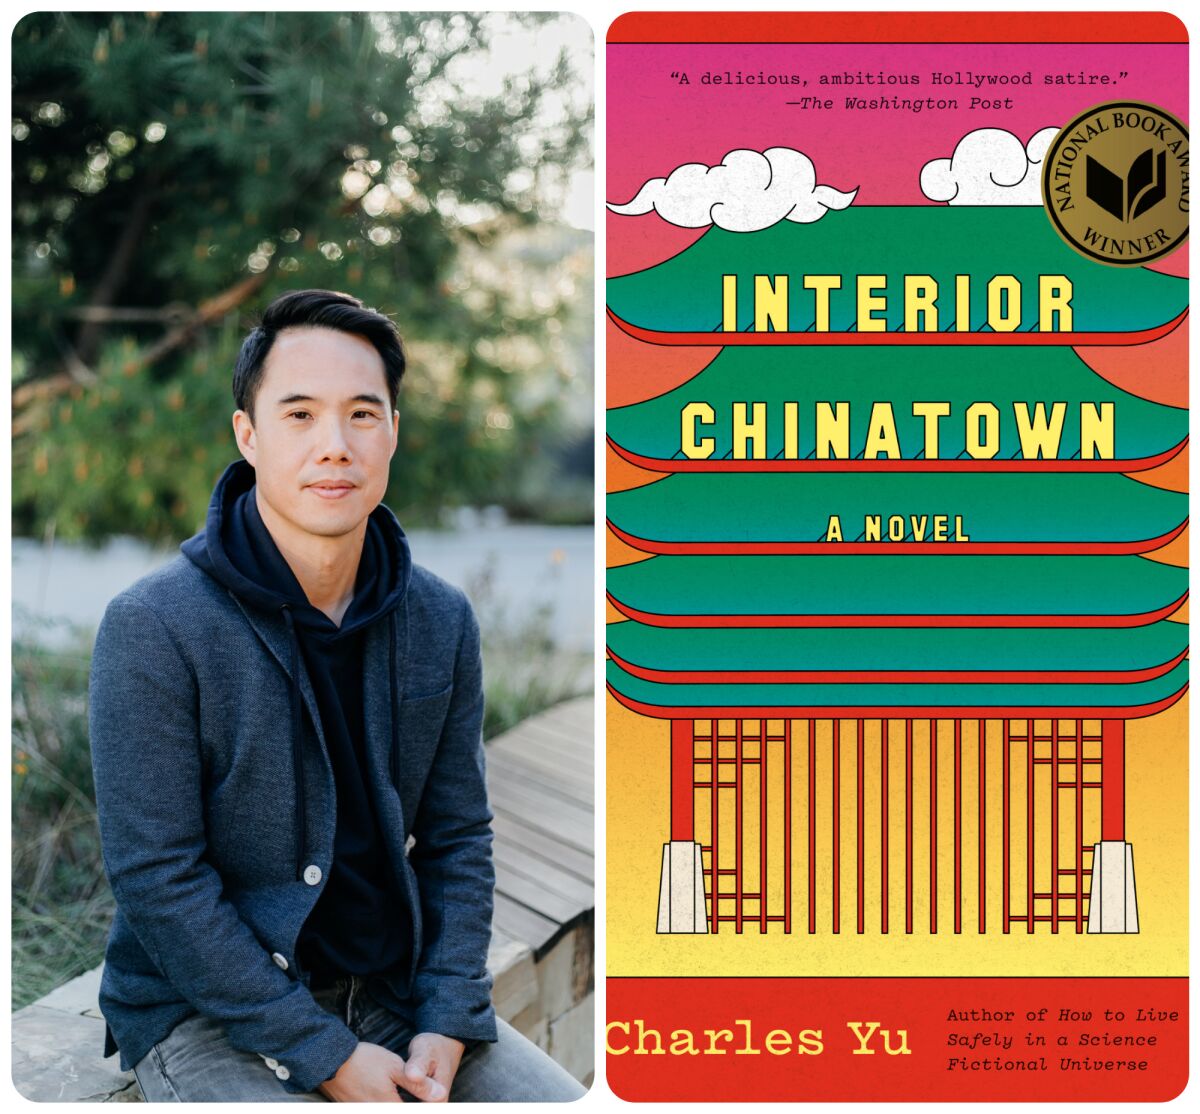 On the left, Charles Yu. On the right, the cover of his book "Interior Chinatown"